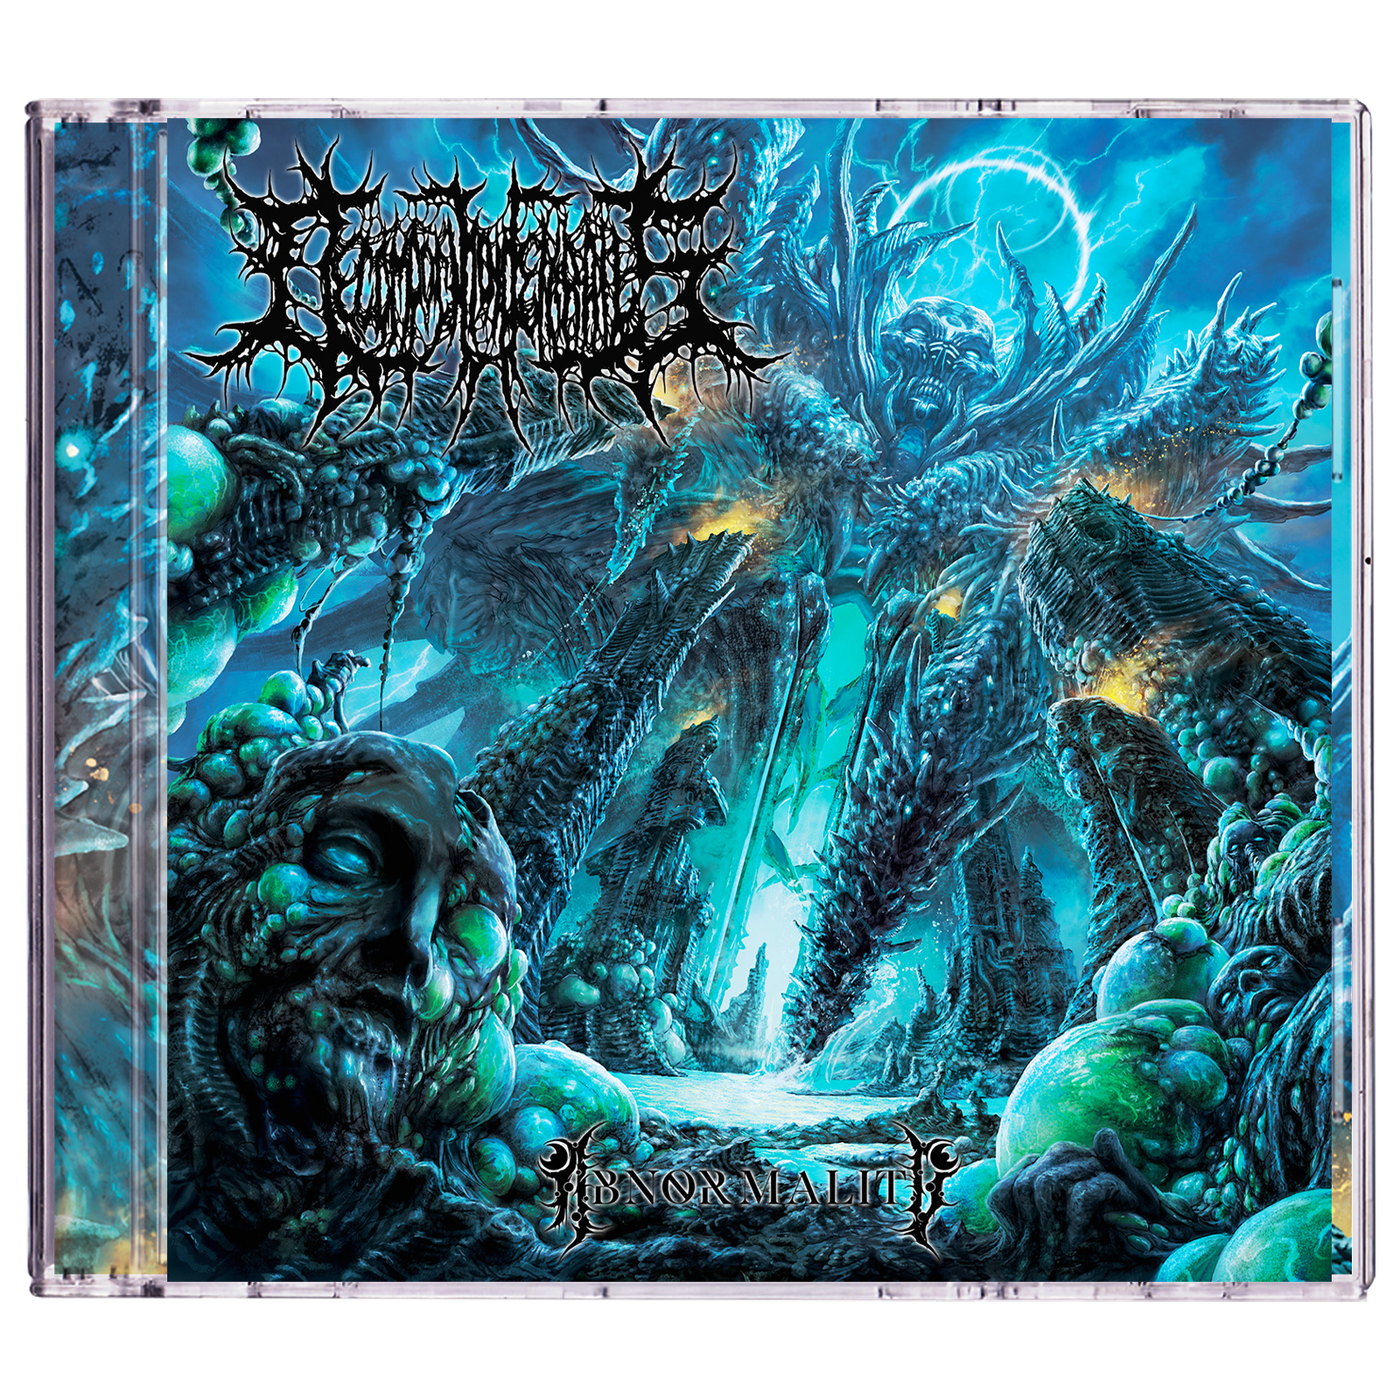 Decomposition Of Entrails 'Abnormality' CD